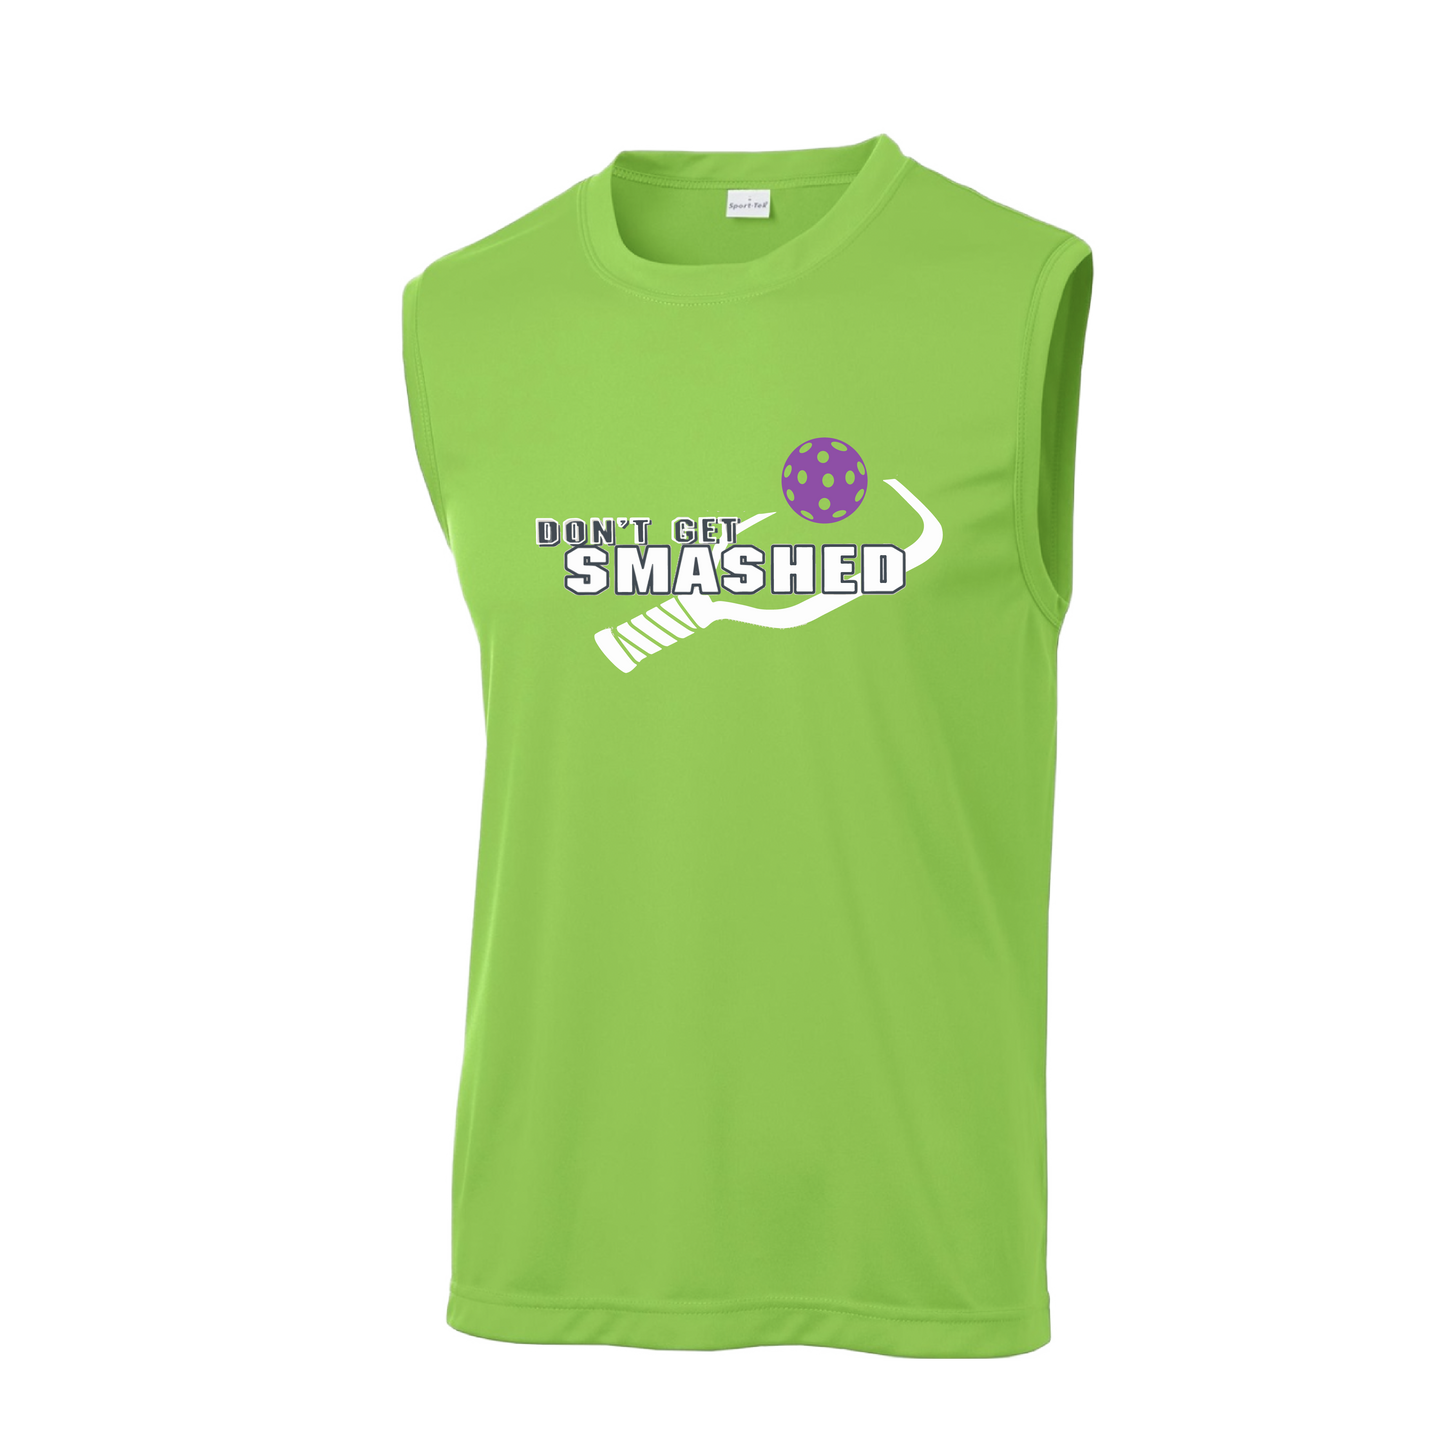 Lightweight, airy, and moisture-wicking styles of Don't Get Smashed shirts come in pickleball colors--purple, rainbow, white, and yellow. Featuring PosiCharge tech that ensures colorfastness and prevents logo fading, their removable tags and set-in sleeves make for all-day comfort.